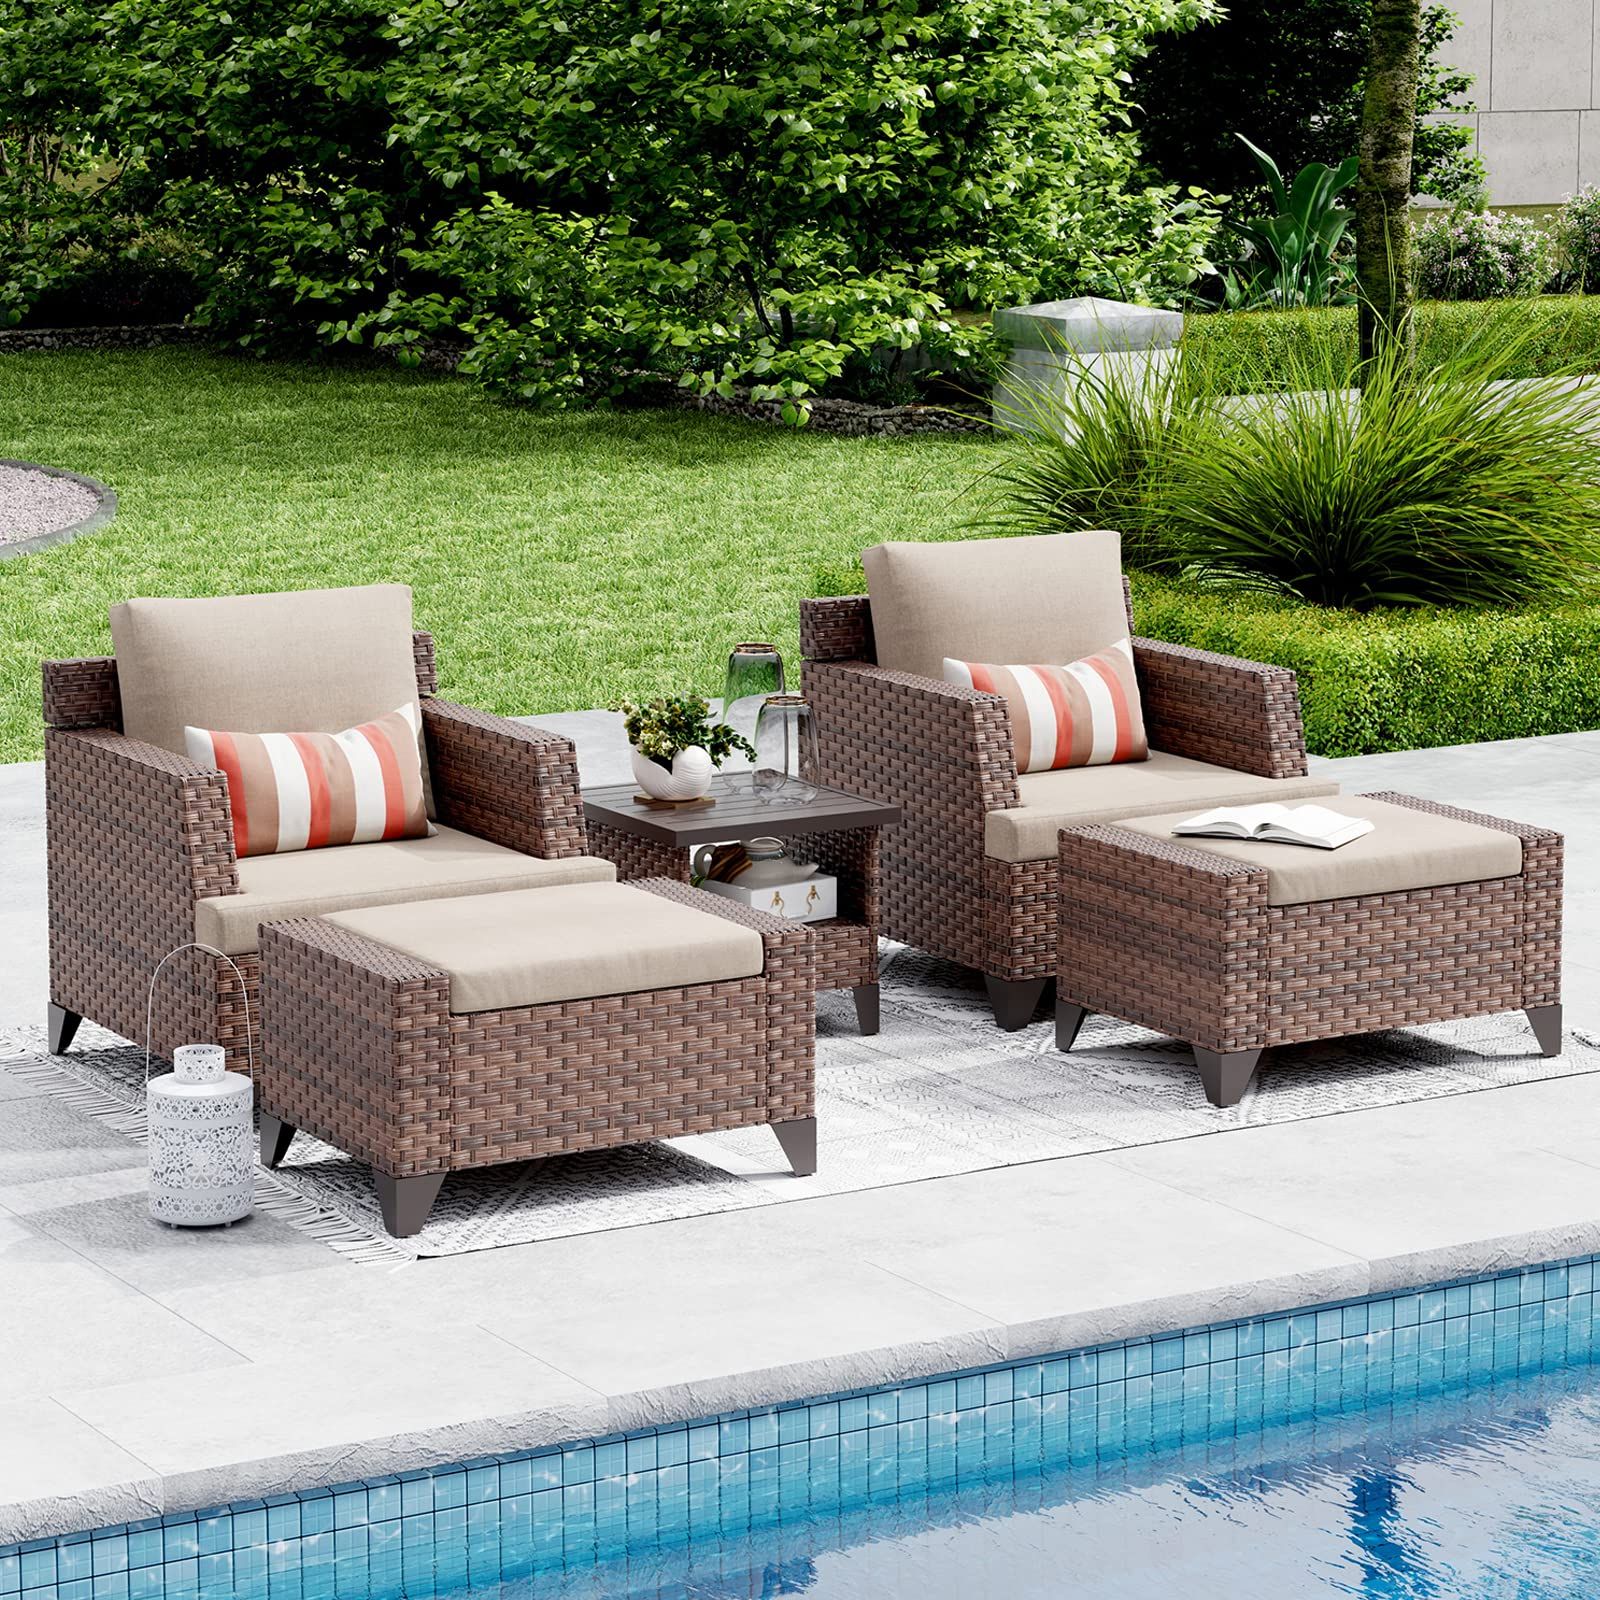 Ottomans Patio Furniture Set Inside Newest Amazon: Sunsitt 5 Piece Outdoor Patio Furniture Set, Rattan Patio  Lounge Chair And Ottoman Set With Waterproof Sofa Covers, Side Table With  Aluminum Slatted Top, Brown Wicker : Patio, Lawn & Garden (View 4 of 15)